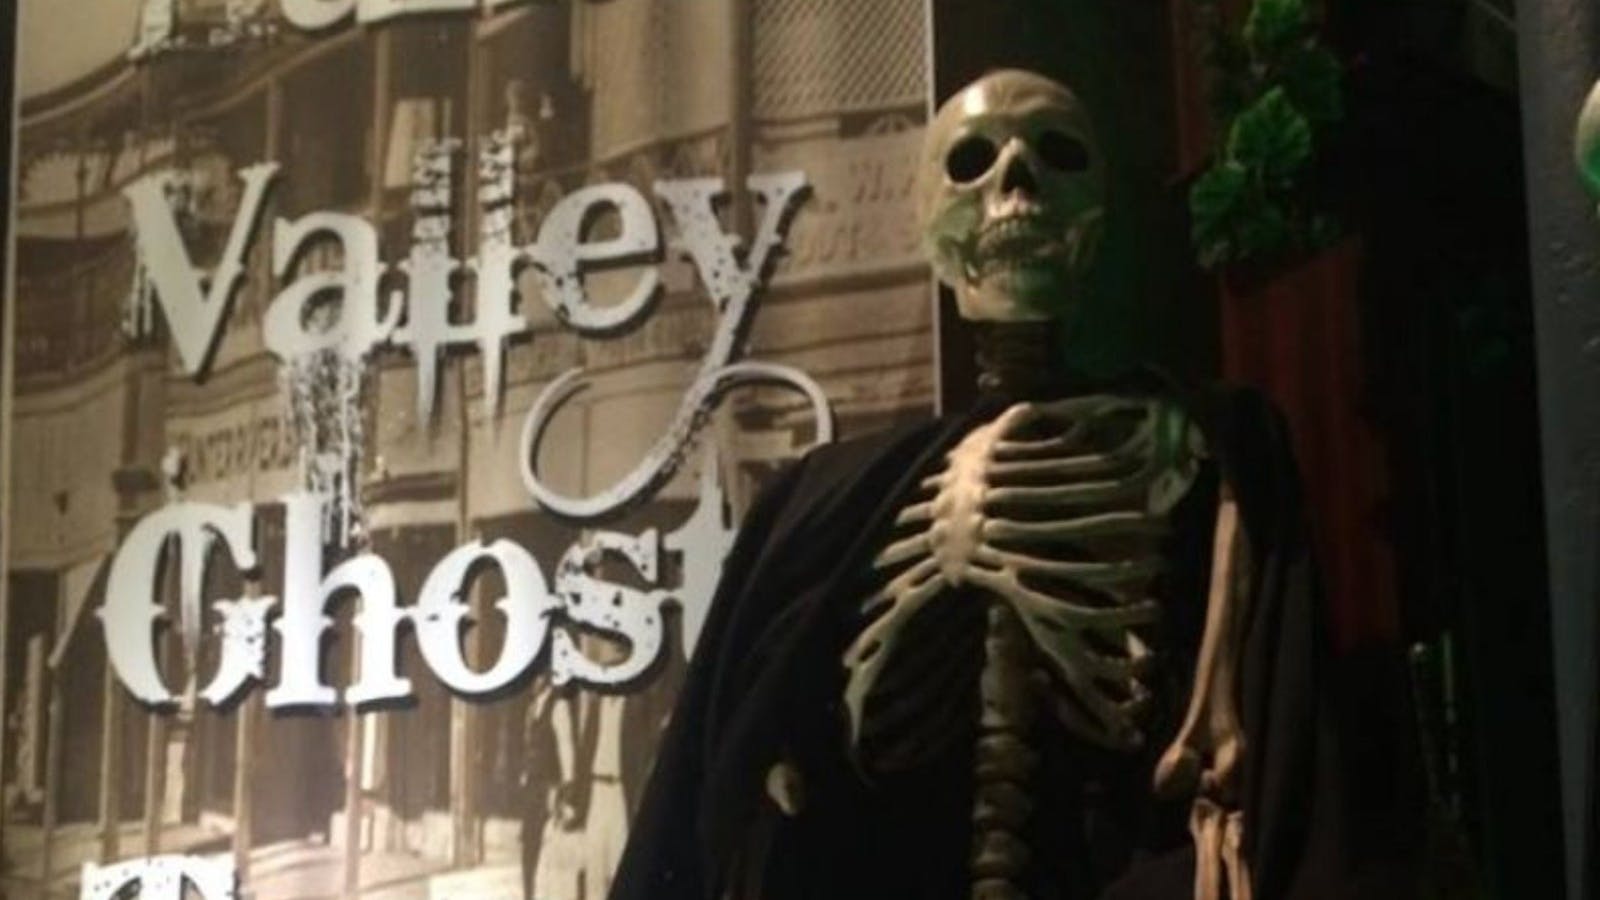 Hunter Valley Ghost Tours